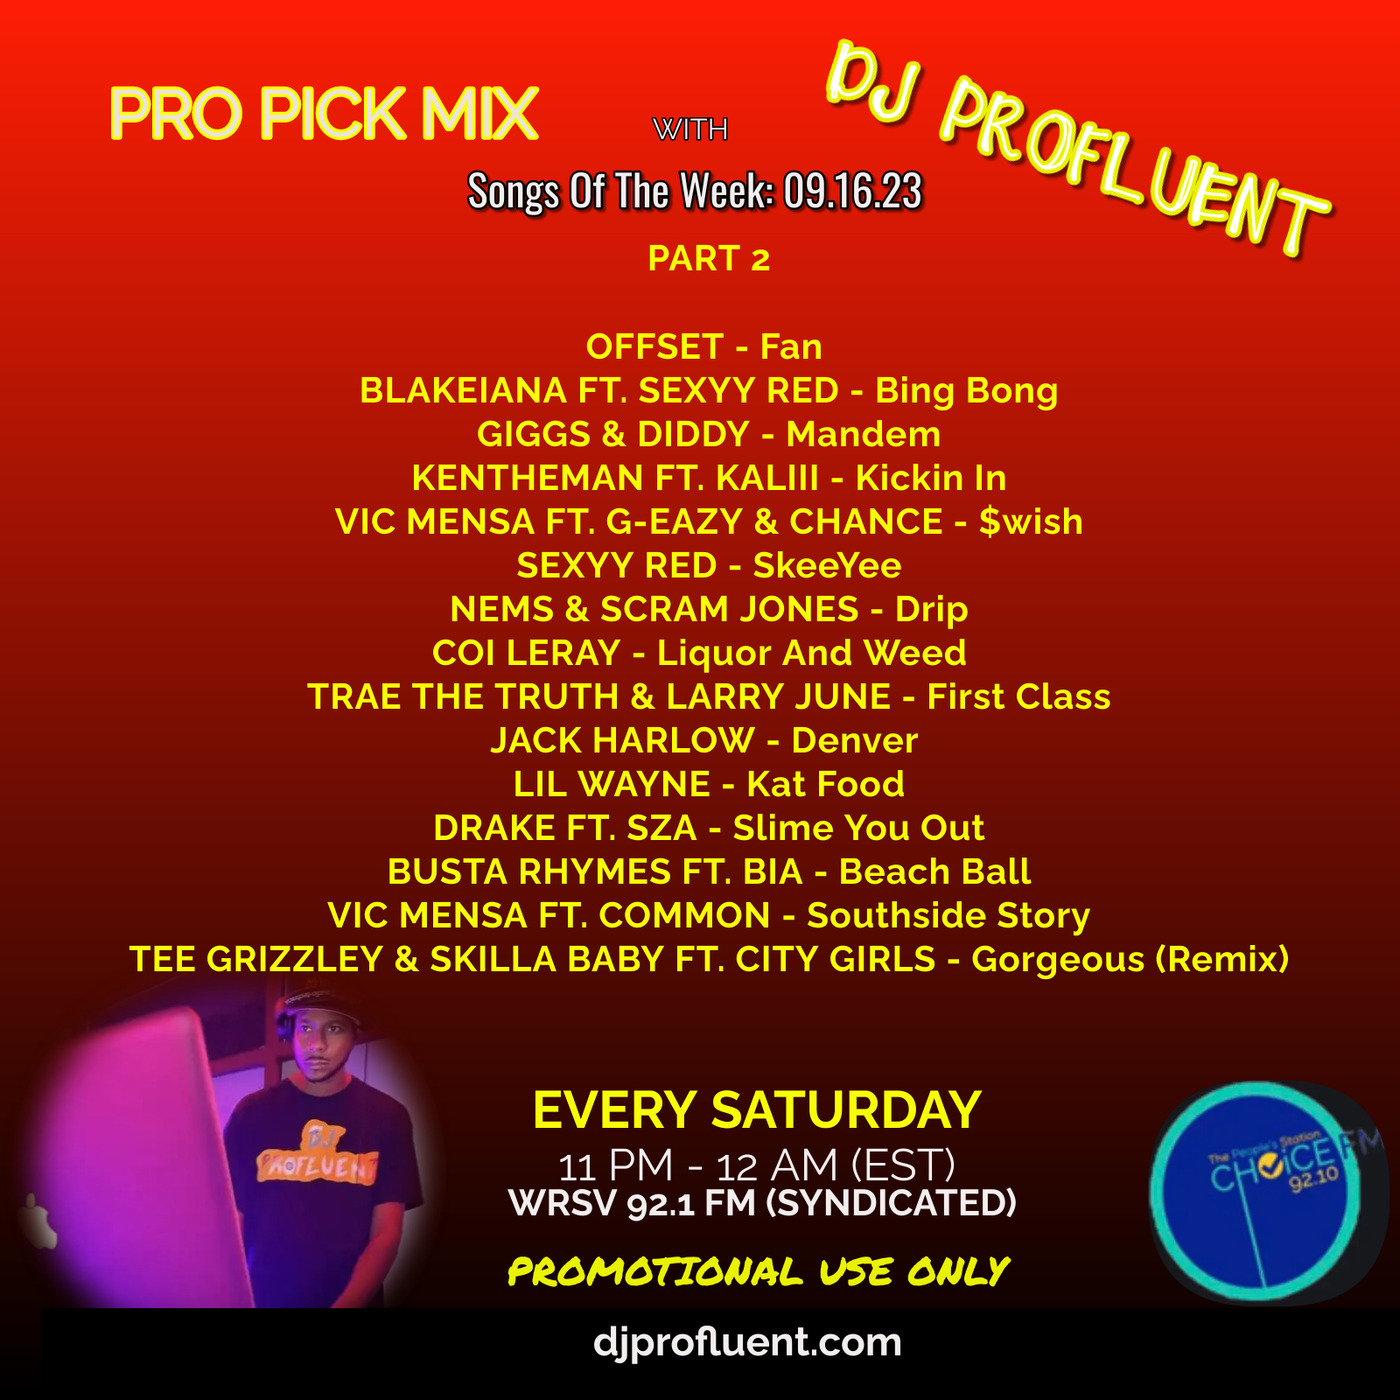 Clean Hip Hop_Mix Vol 35-9-16-2023_Part 2 [Offset, Sexxy Red, Diddy, Drake, Common]